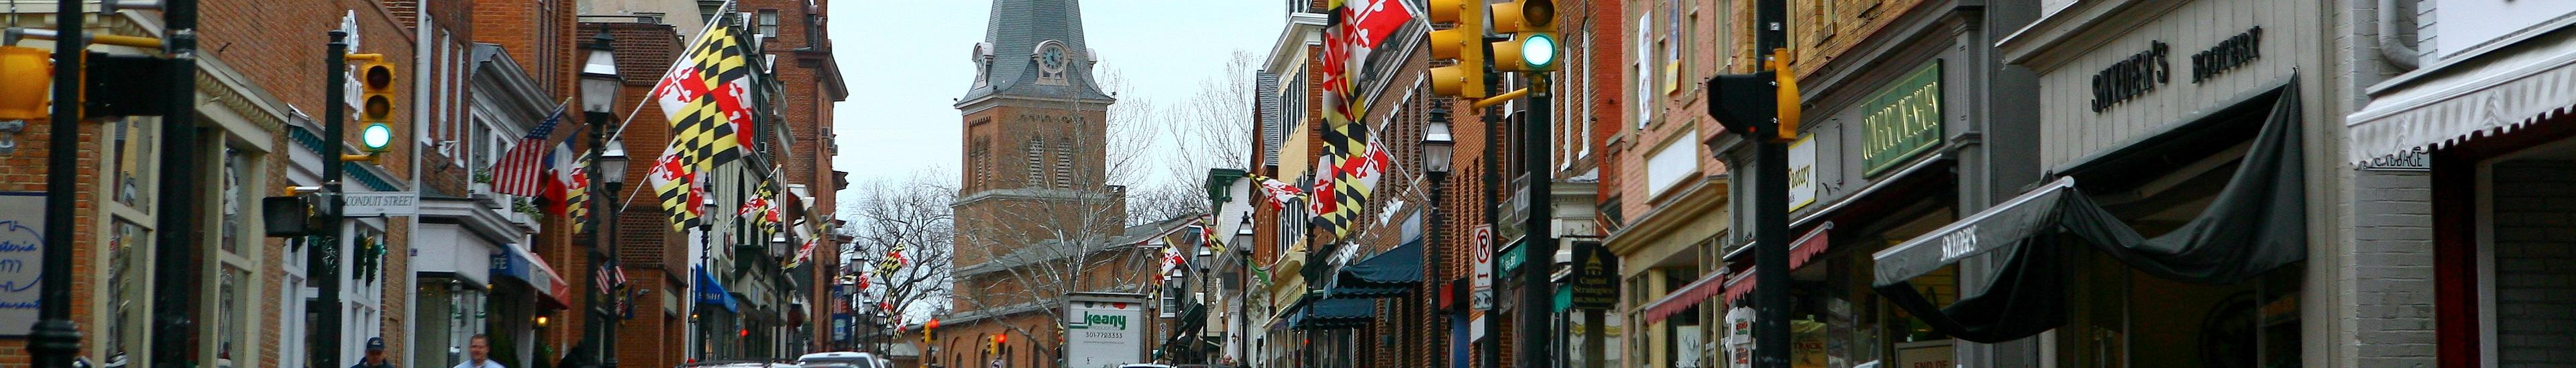 Banner image for Annapolis on GigsGuide